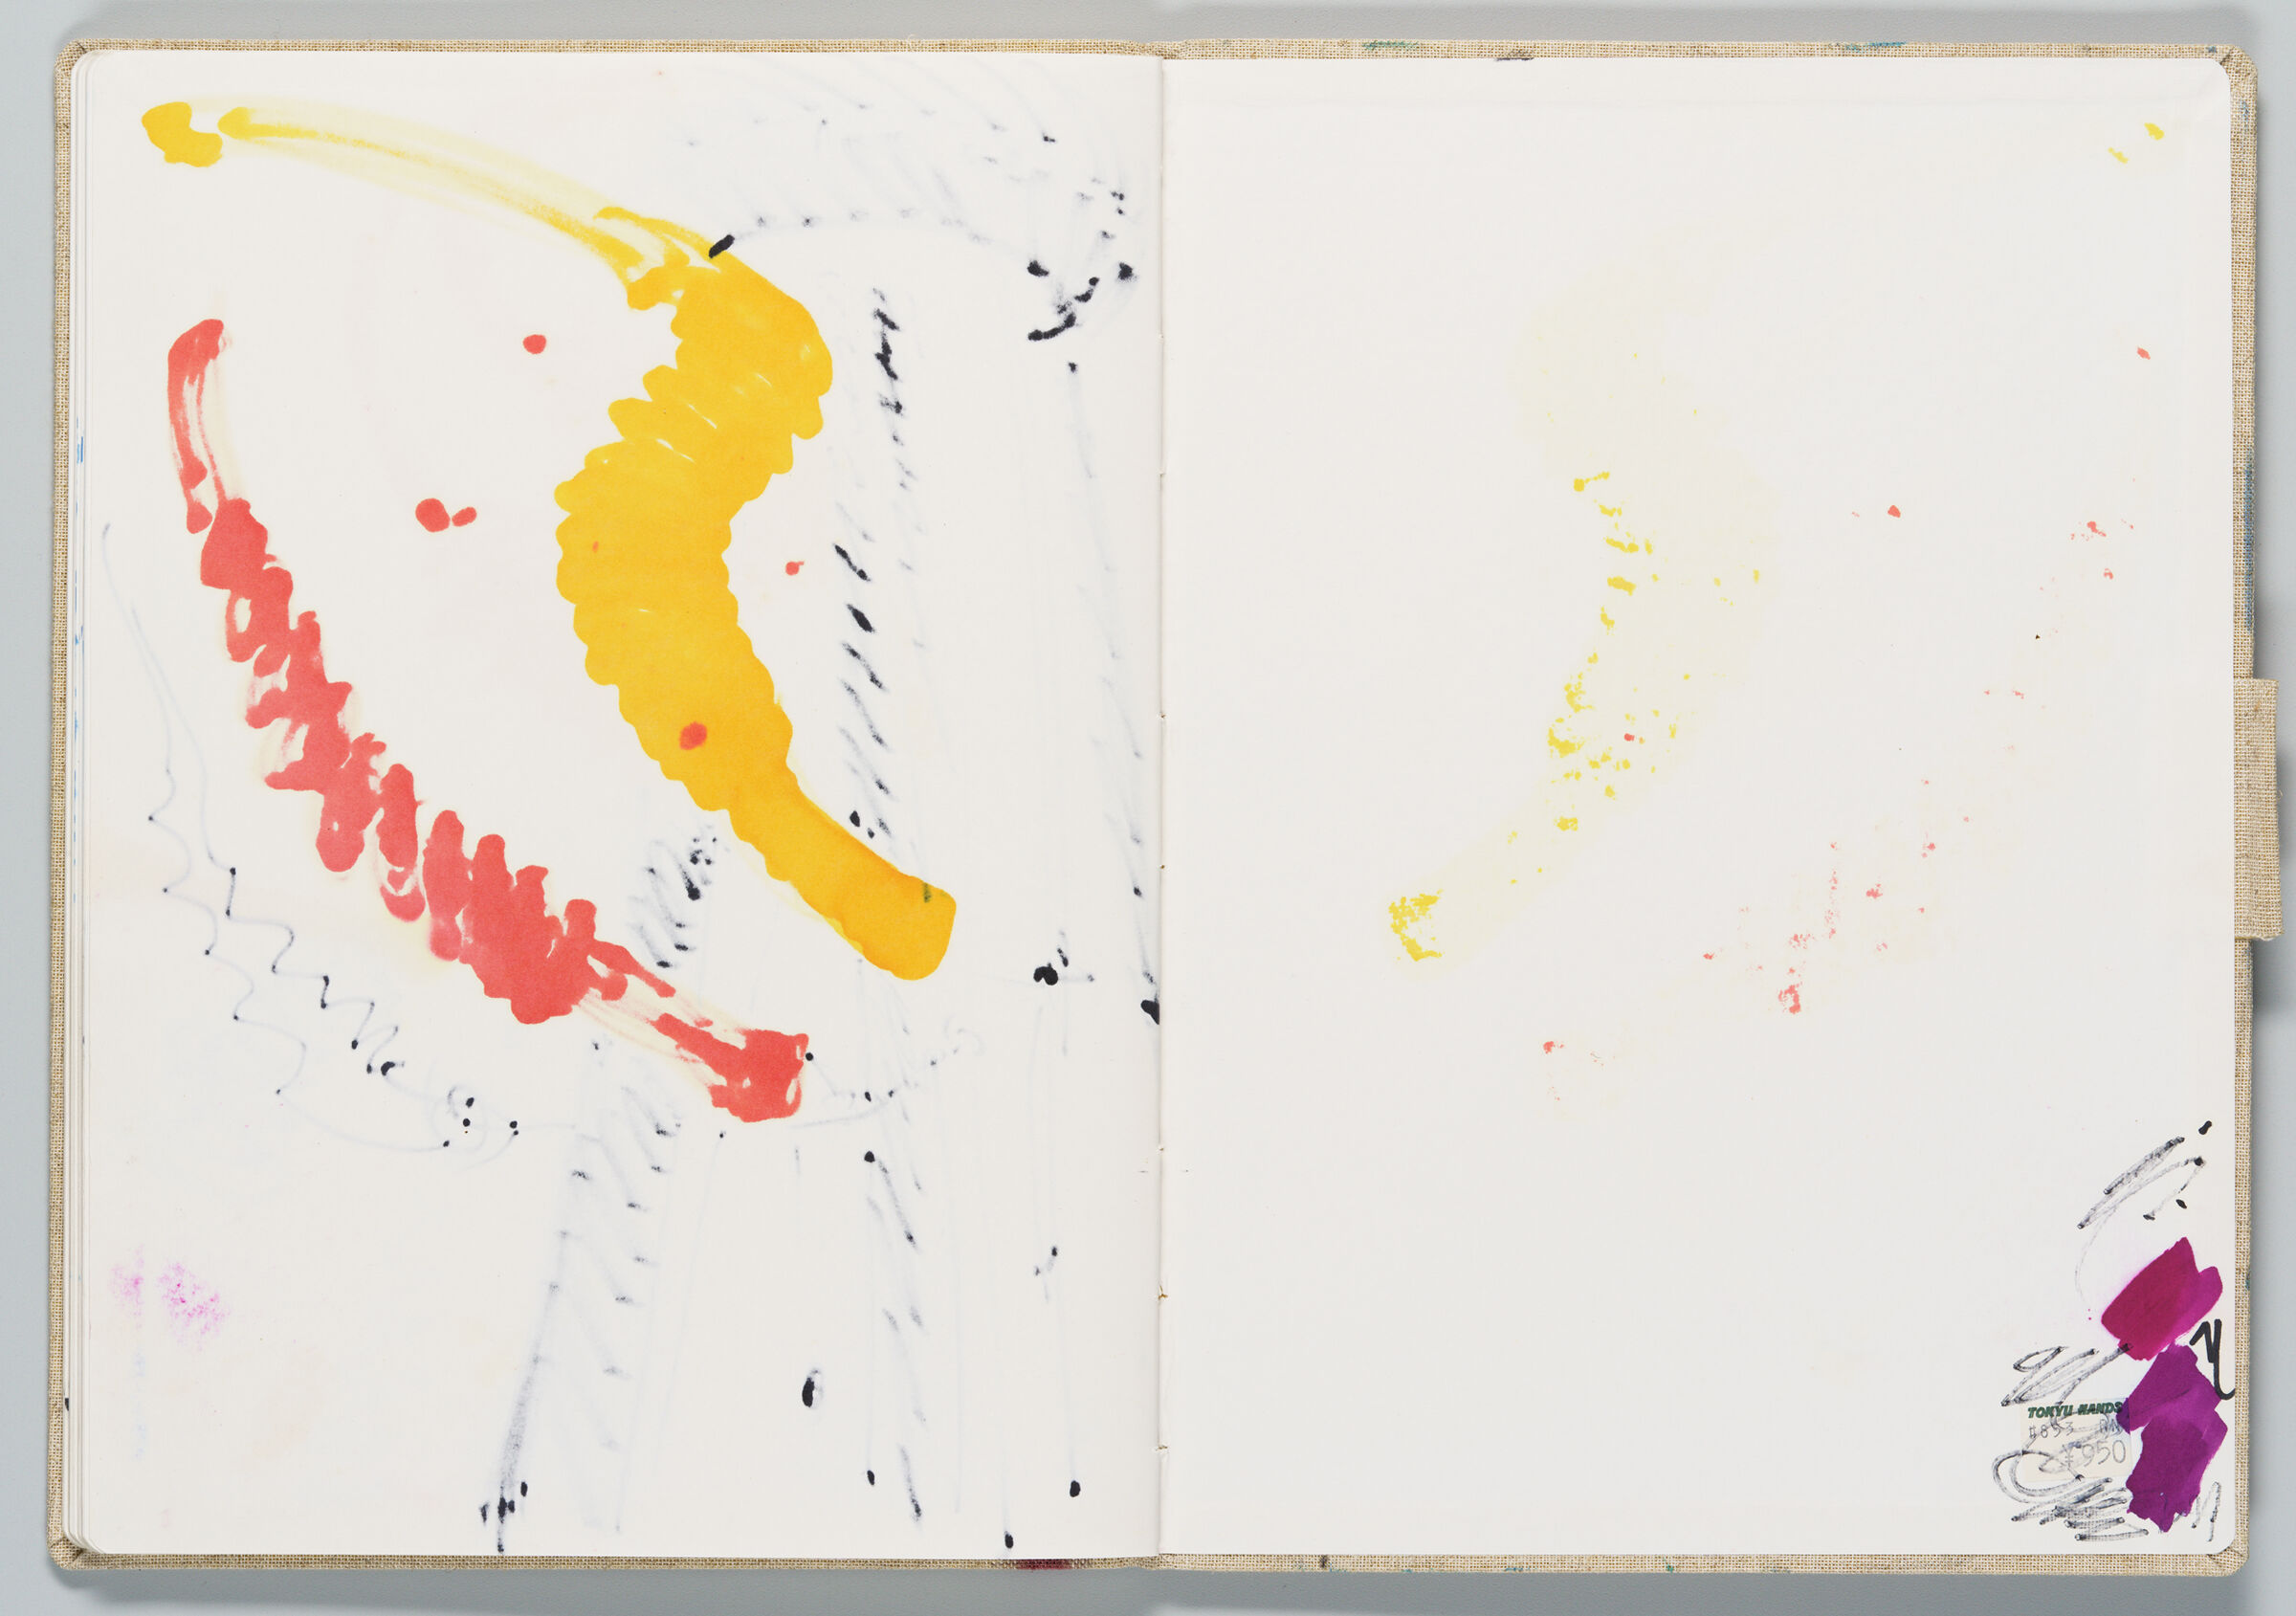 Untitled (Bleed-Through Of Previous Page With Color Transfer, Left Page); Untitled (Back Endpaper With Marker Tests, Color Transfer, And Price Sticker, Right Page)